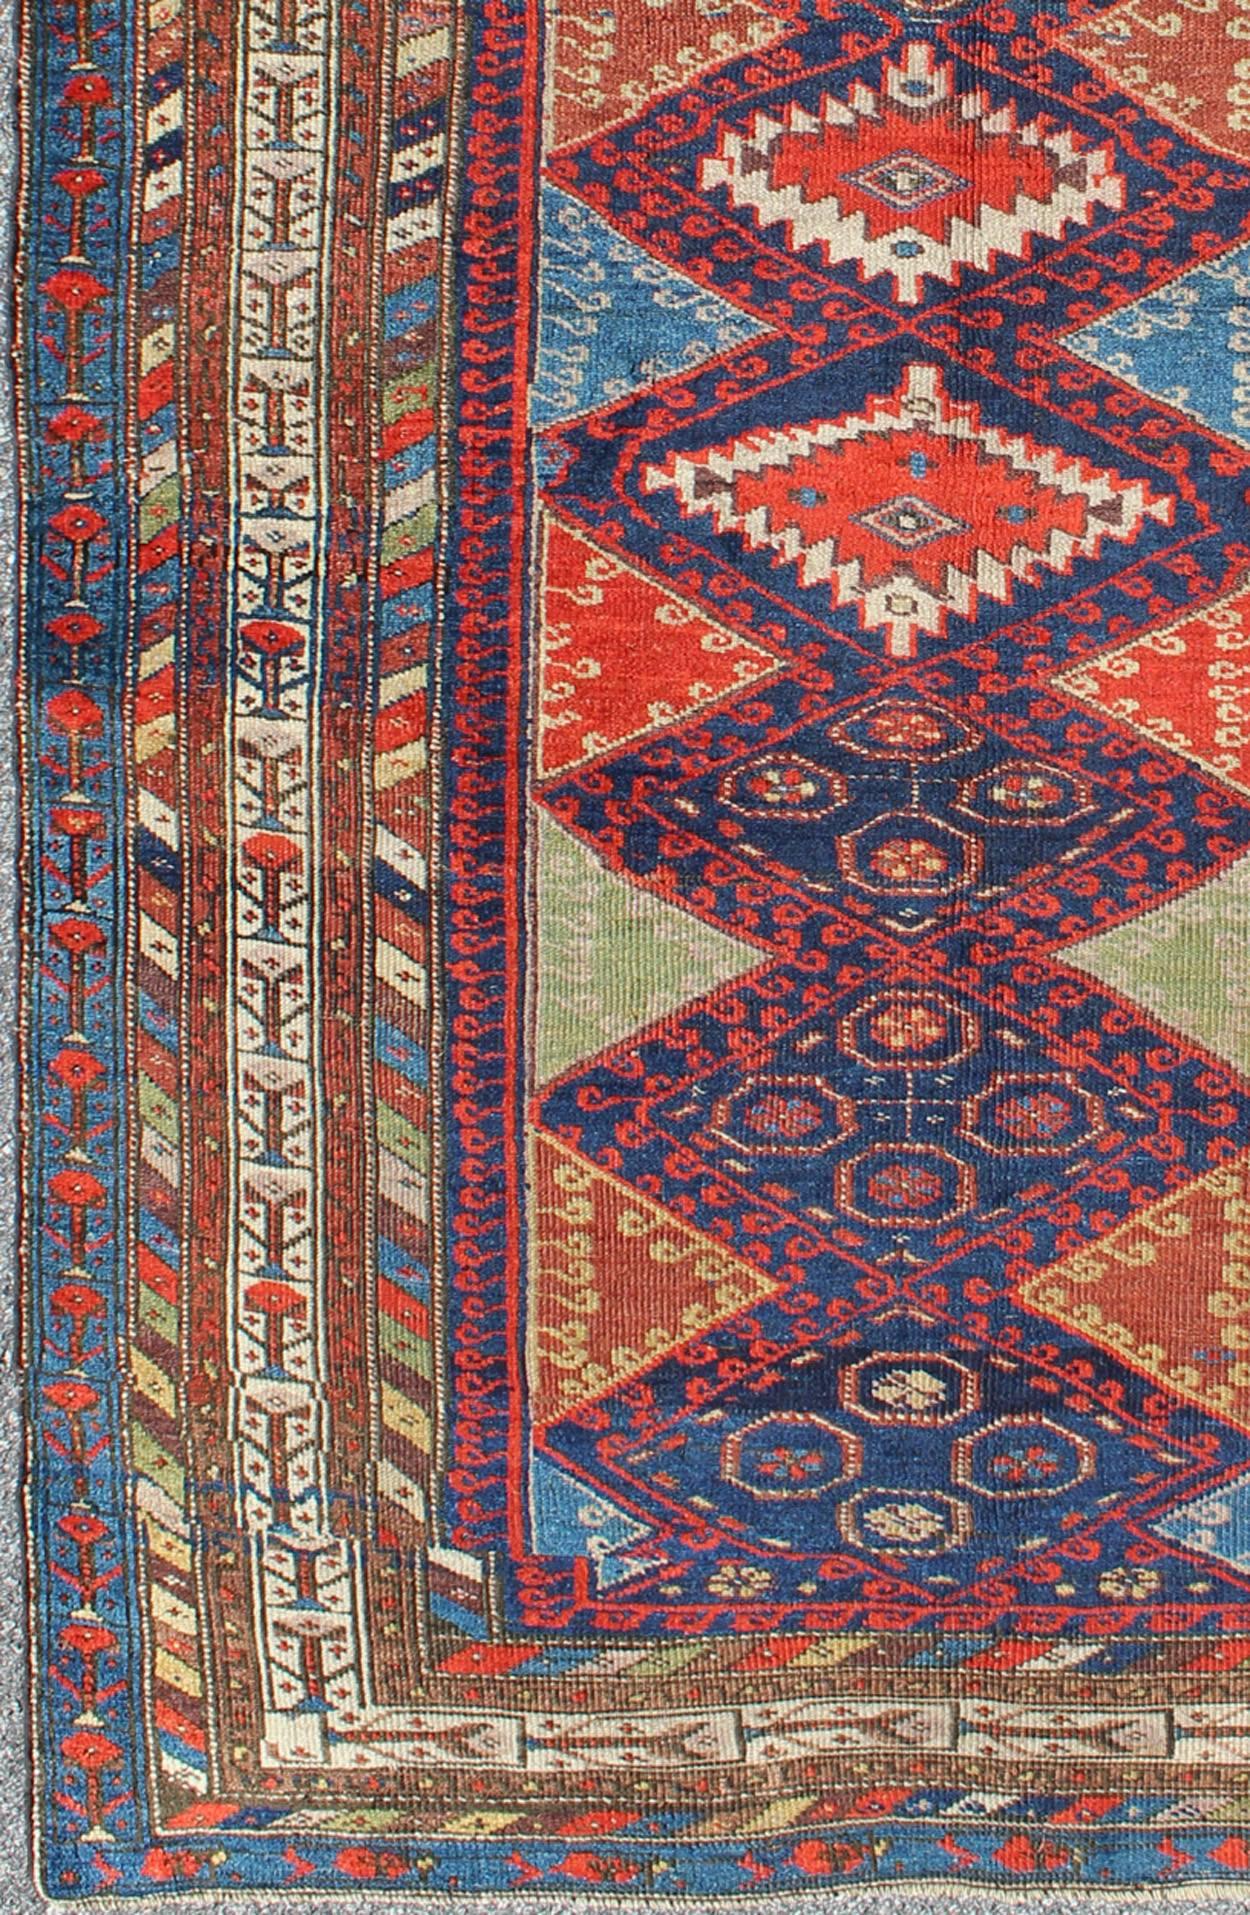 Regardless of where you place this remarkable carpet, its stunning array of colors and exquisite geometric design will transport you to a place of rare, exotic beauty. Fashioned during the late 19th century, this rug displays a repeating diamond